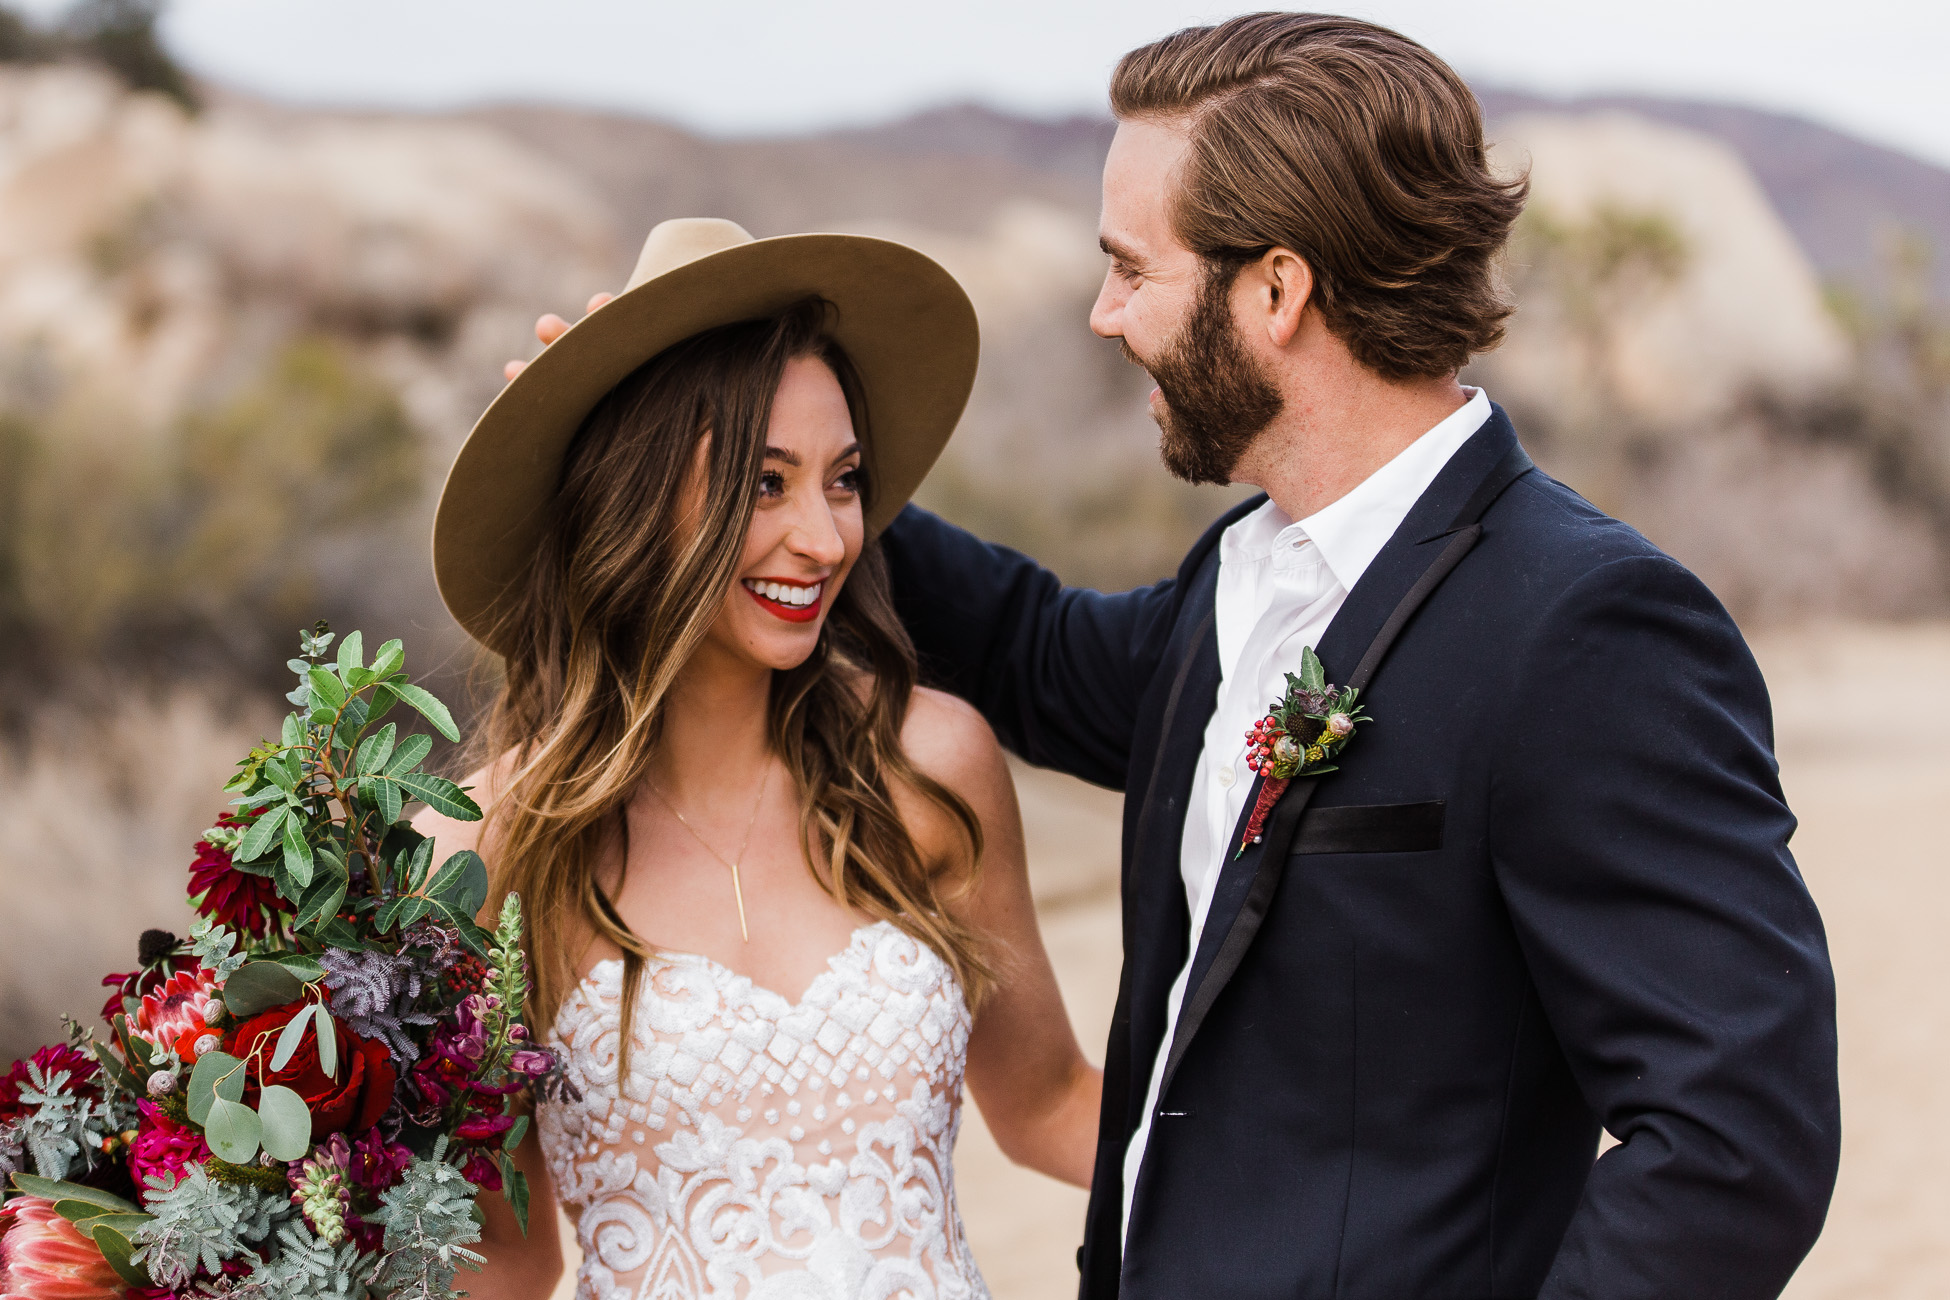 Bride and Groom smiling elopement wdding joshua tree national park